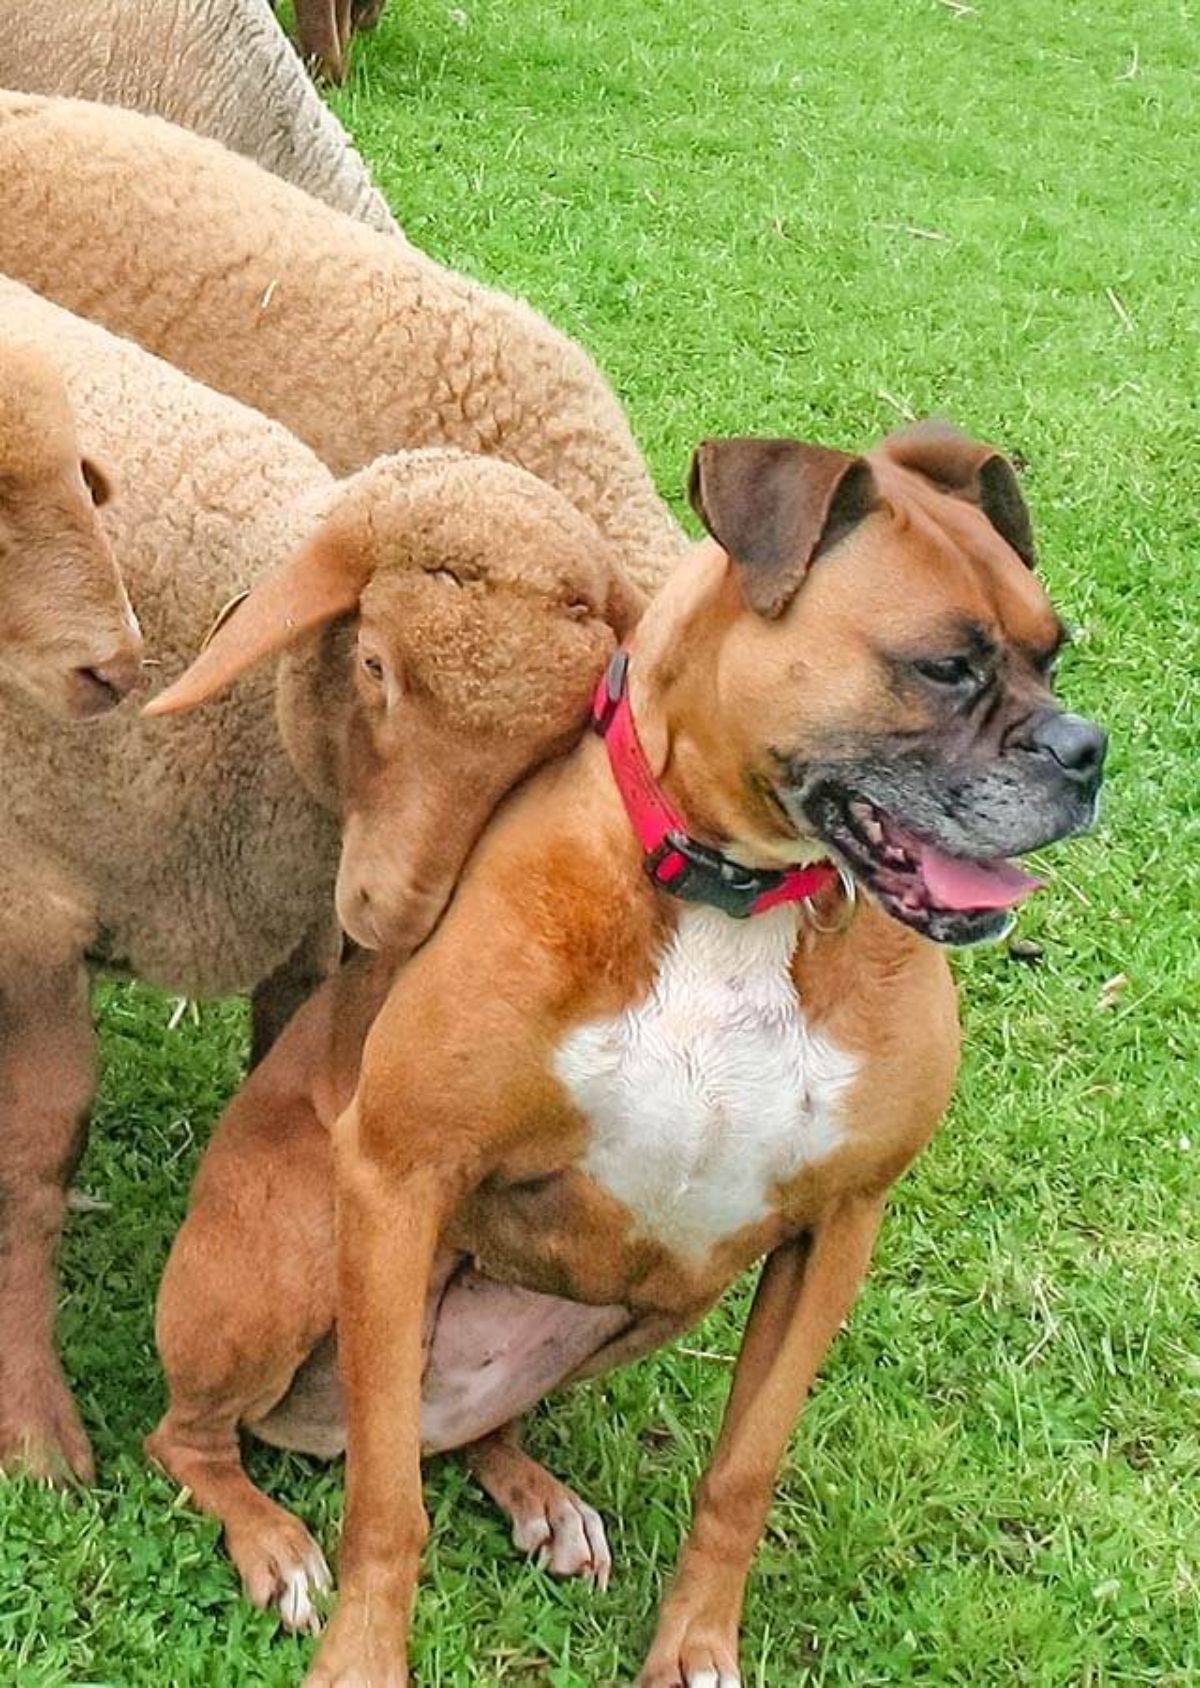 brown sheep headbutting a brown and white dog with 2 other brown sheep on either side